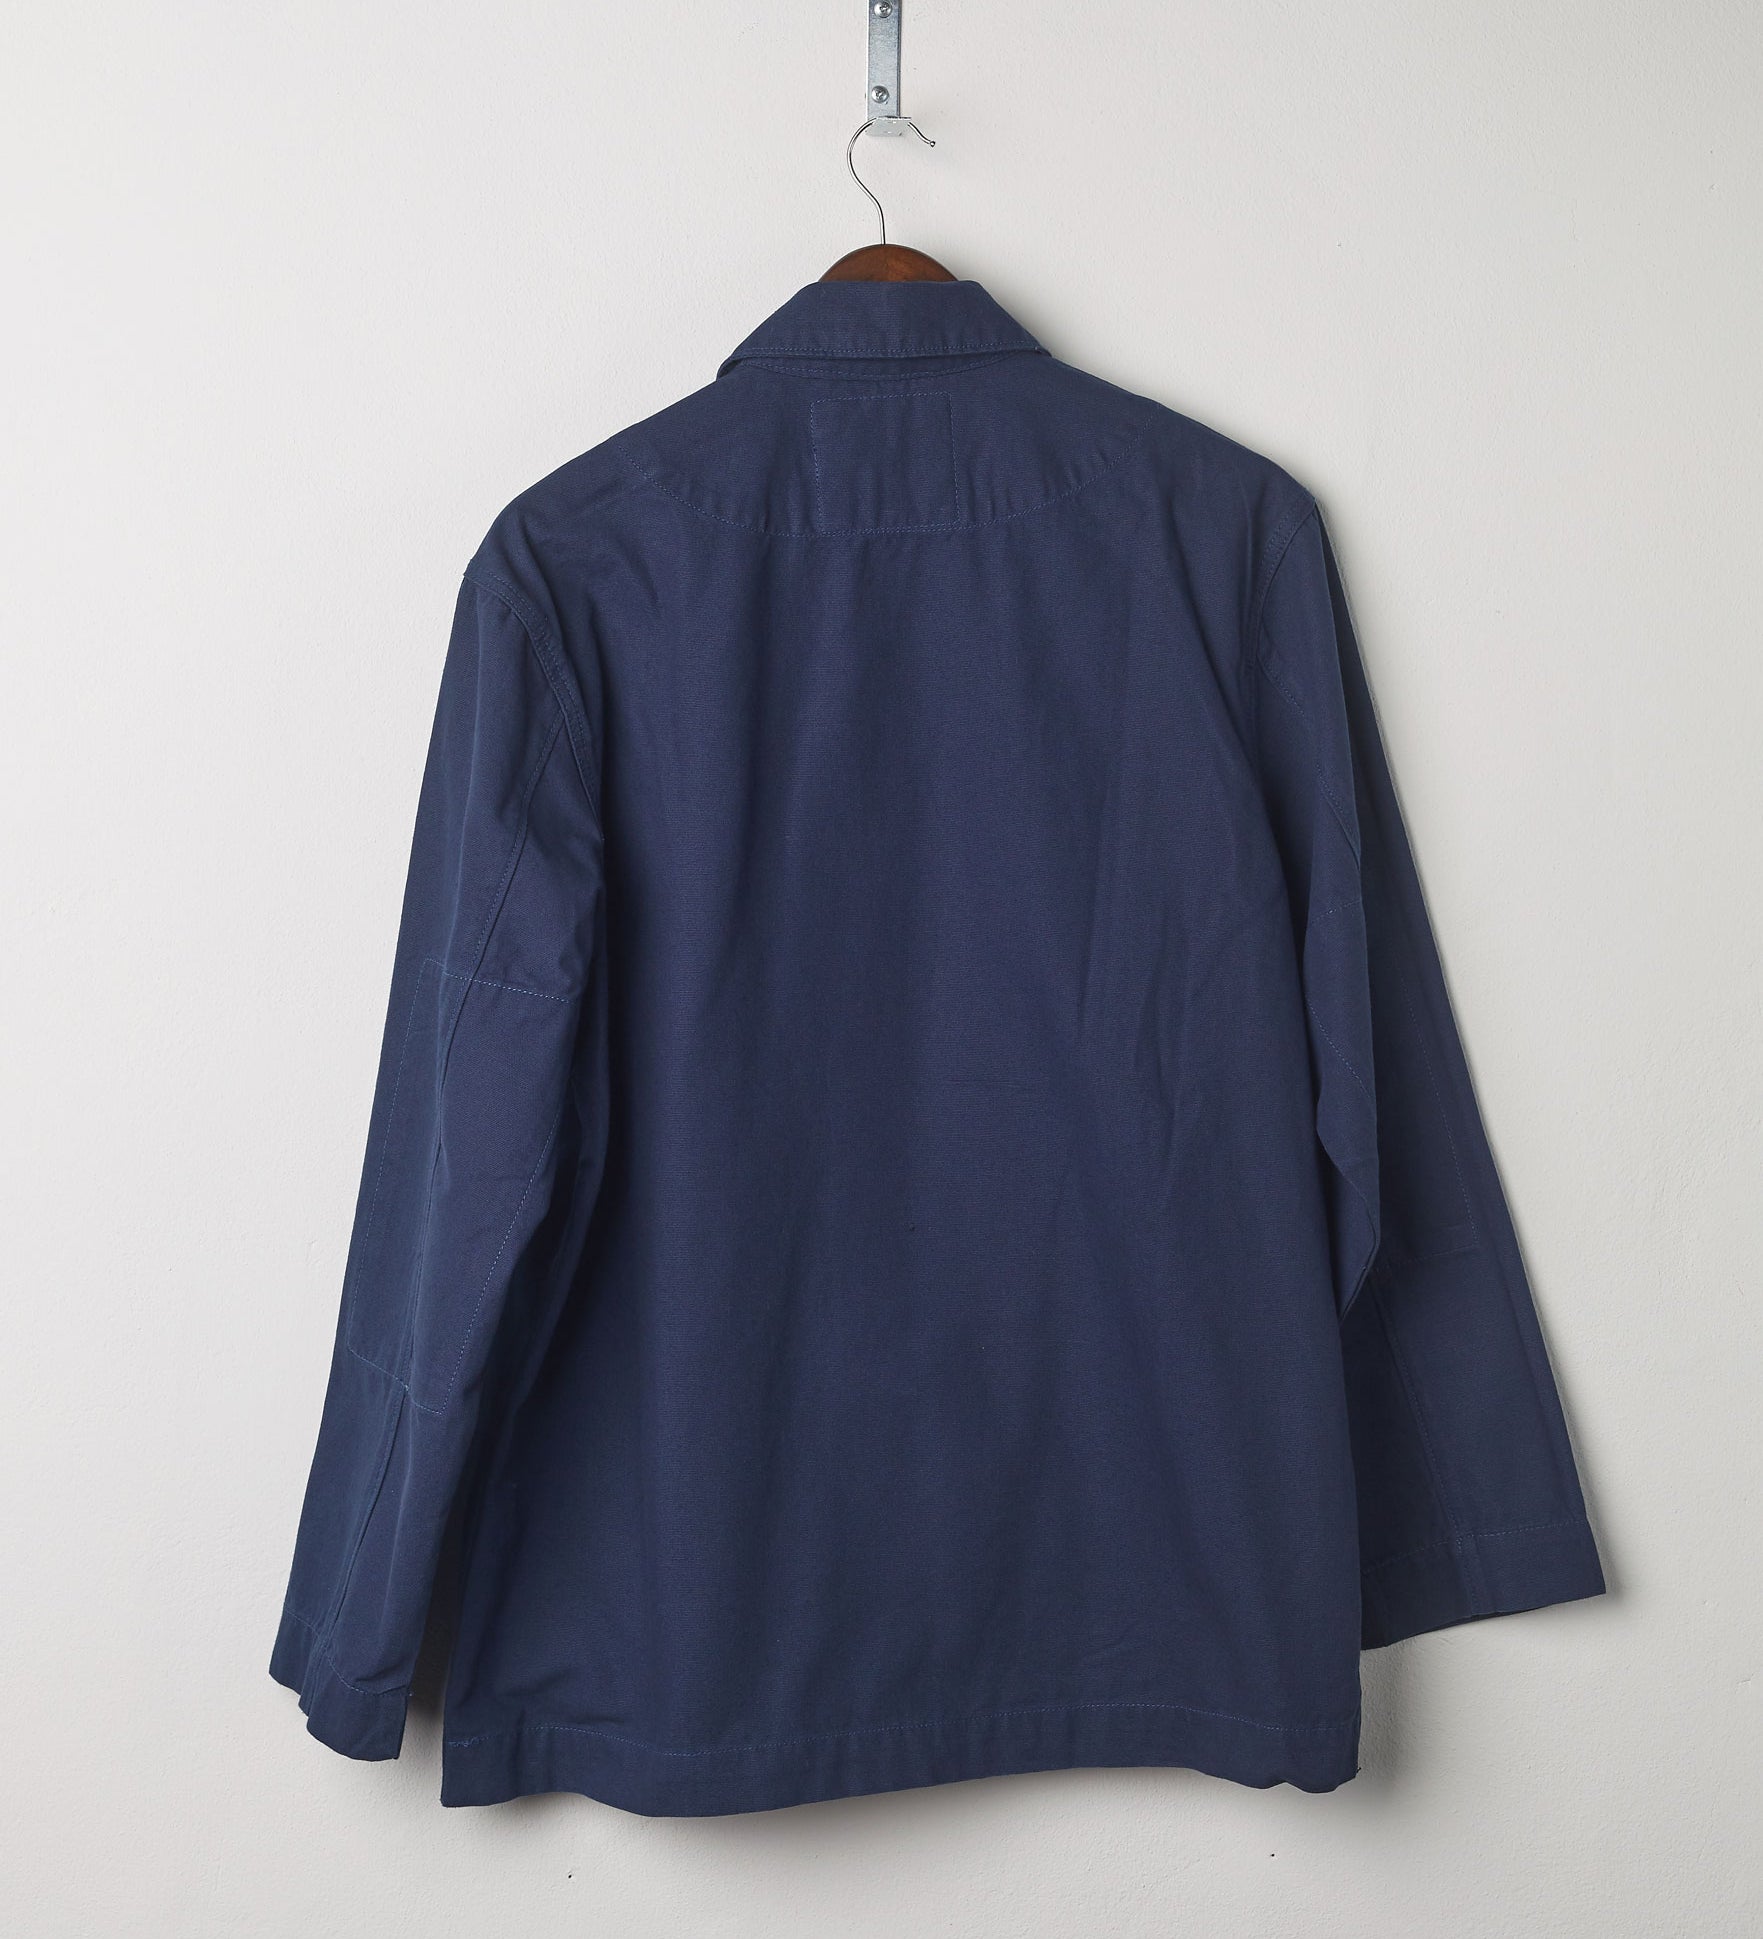 Full-length, rear view of Uskees #3006 navy blazer showing reinforced elbows and simple design.